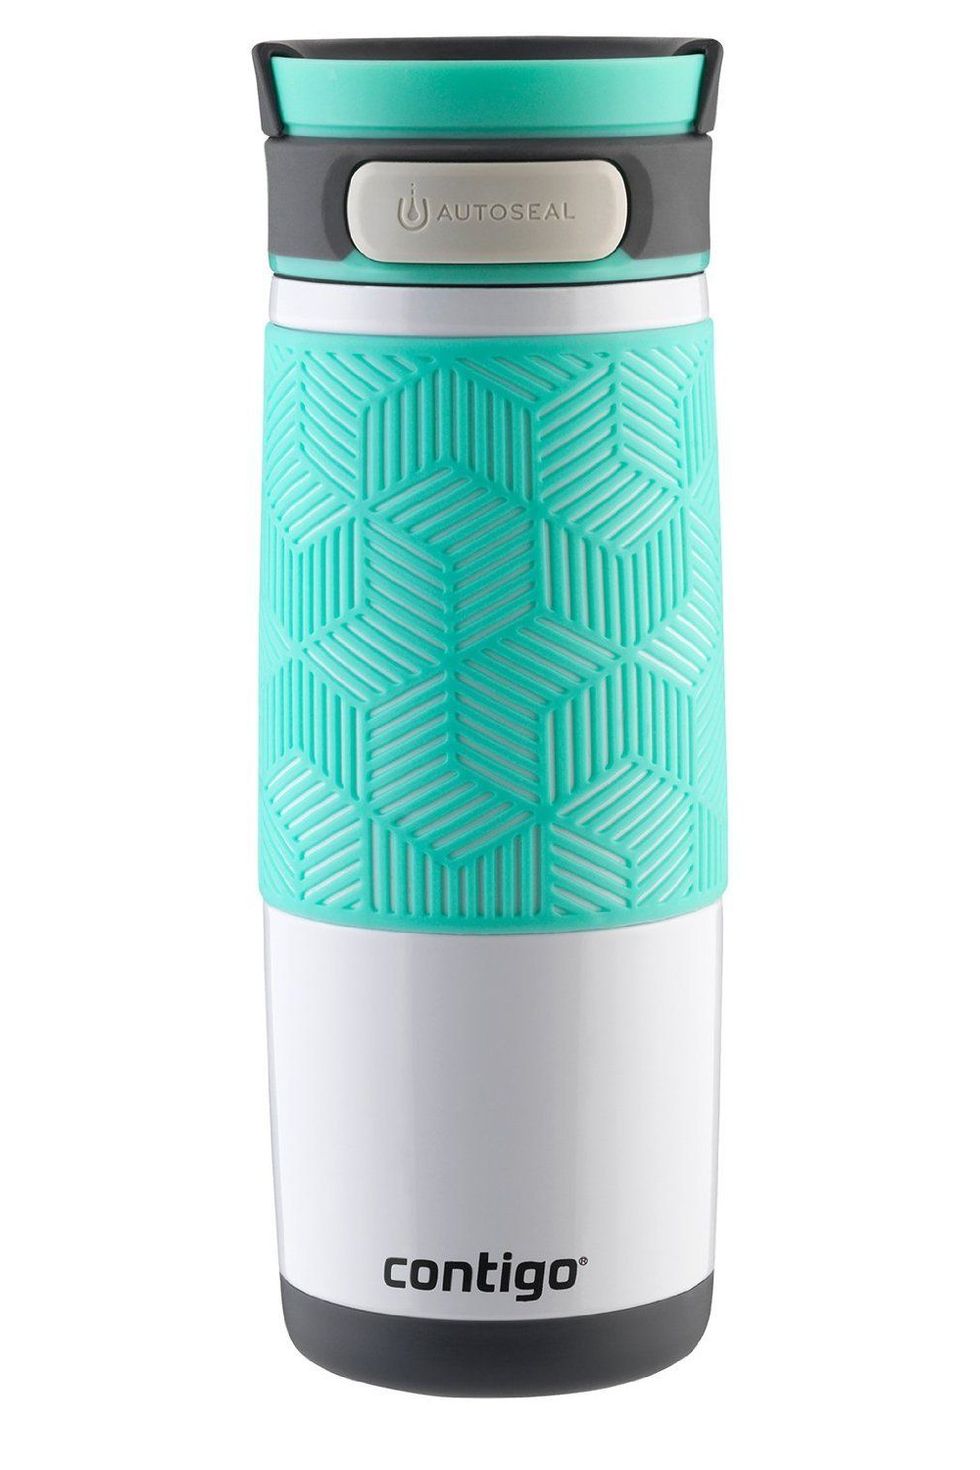 Simple Modern 32oz. Slim Cruiser Tumbler with Straw & Closing Lid Travel  Mug - Gift Double Wall Vacuum Insulated - 18/8 Stainless Steel Water Bottle  -Prism 